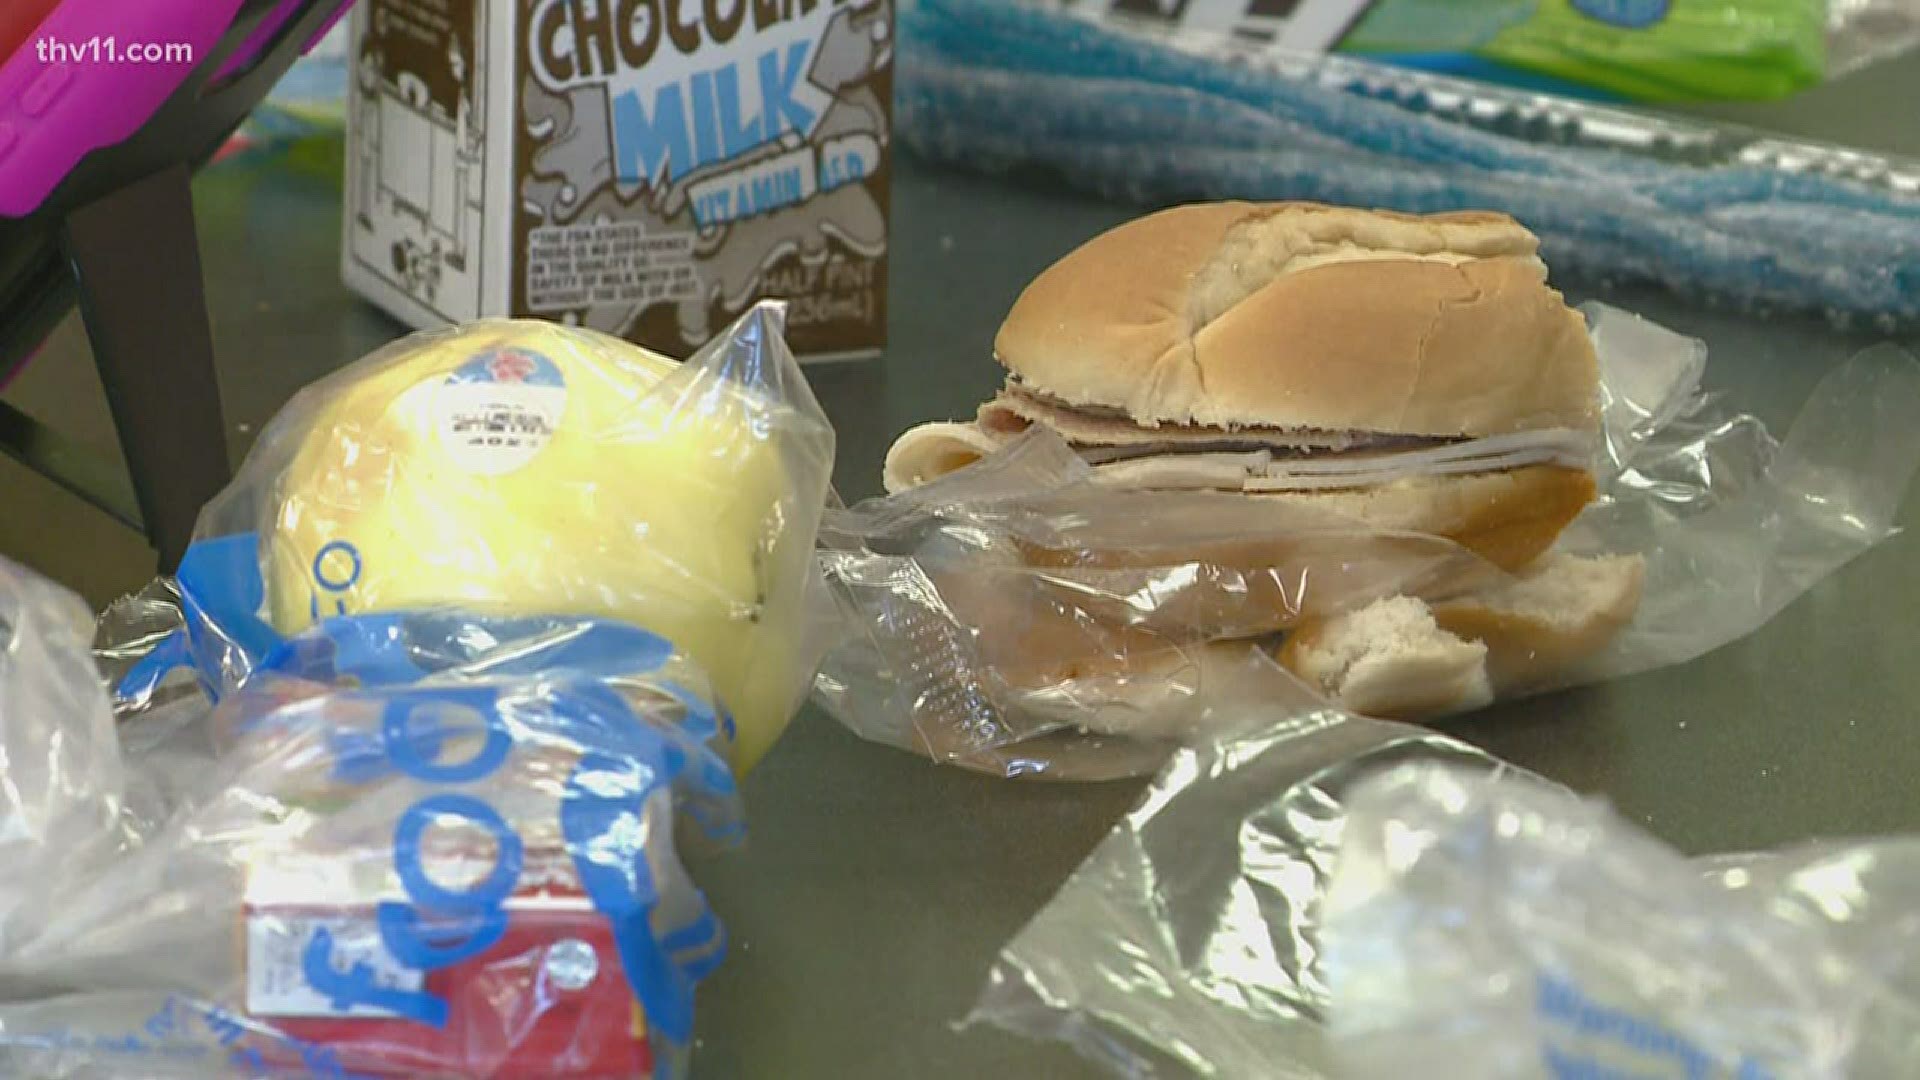 More than a month into the program, the city wants families to know that free food has not stopped.